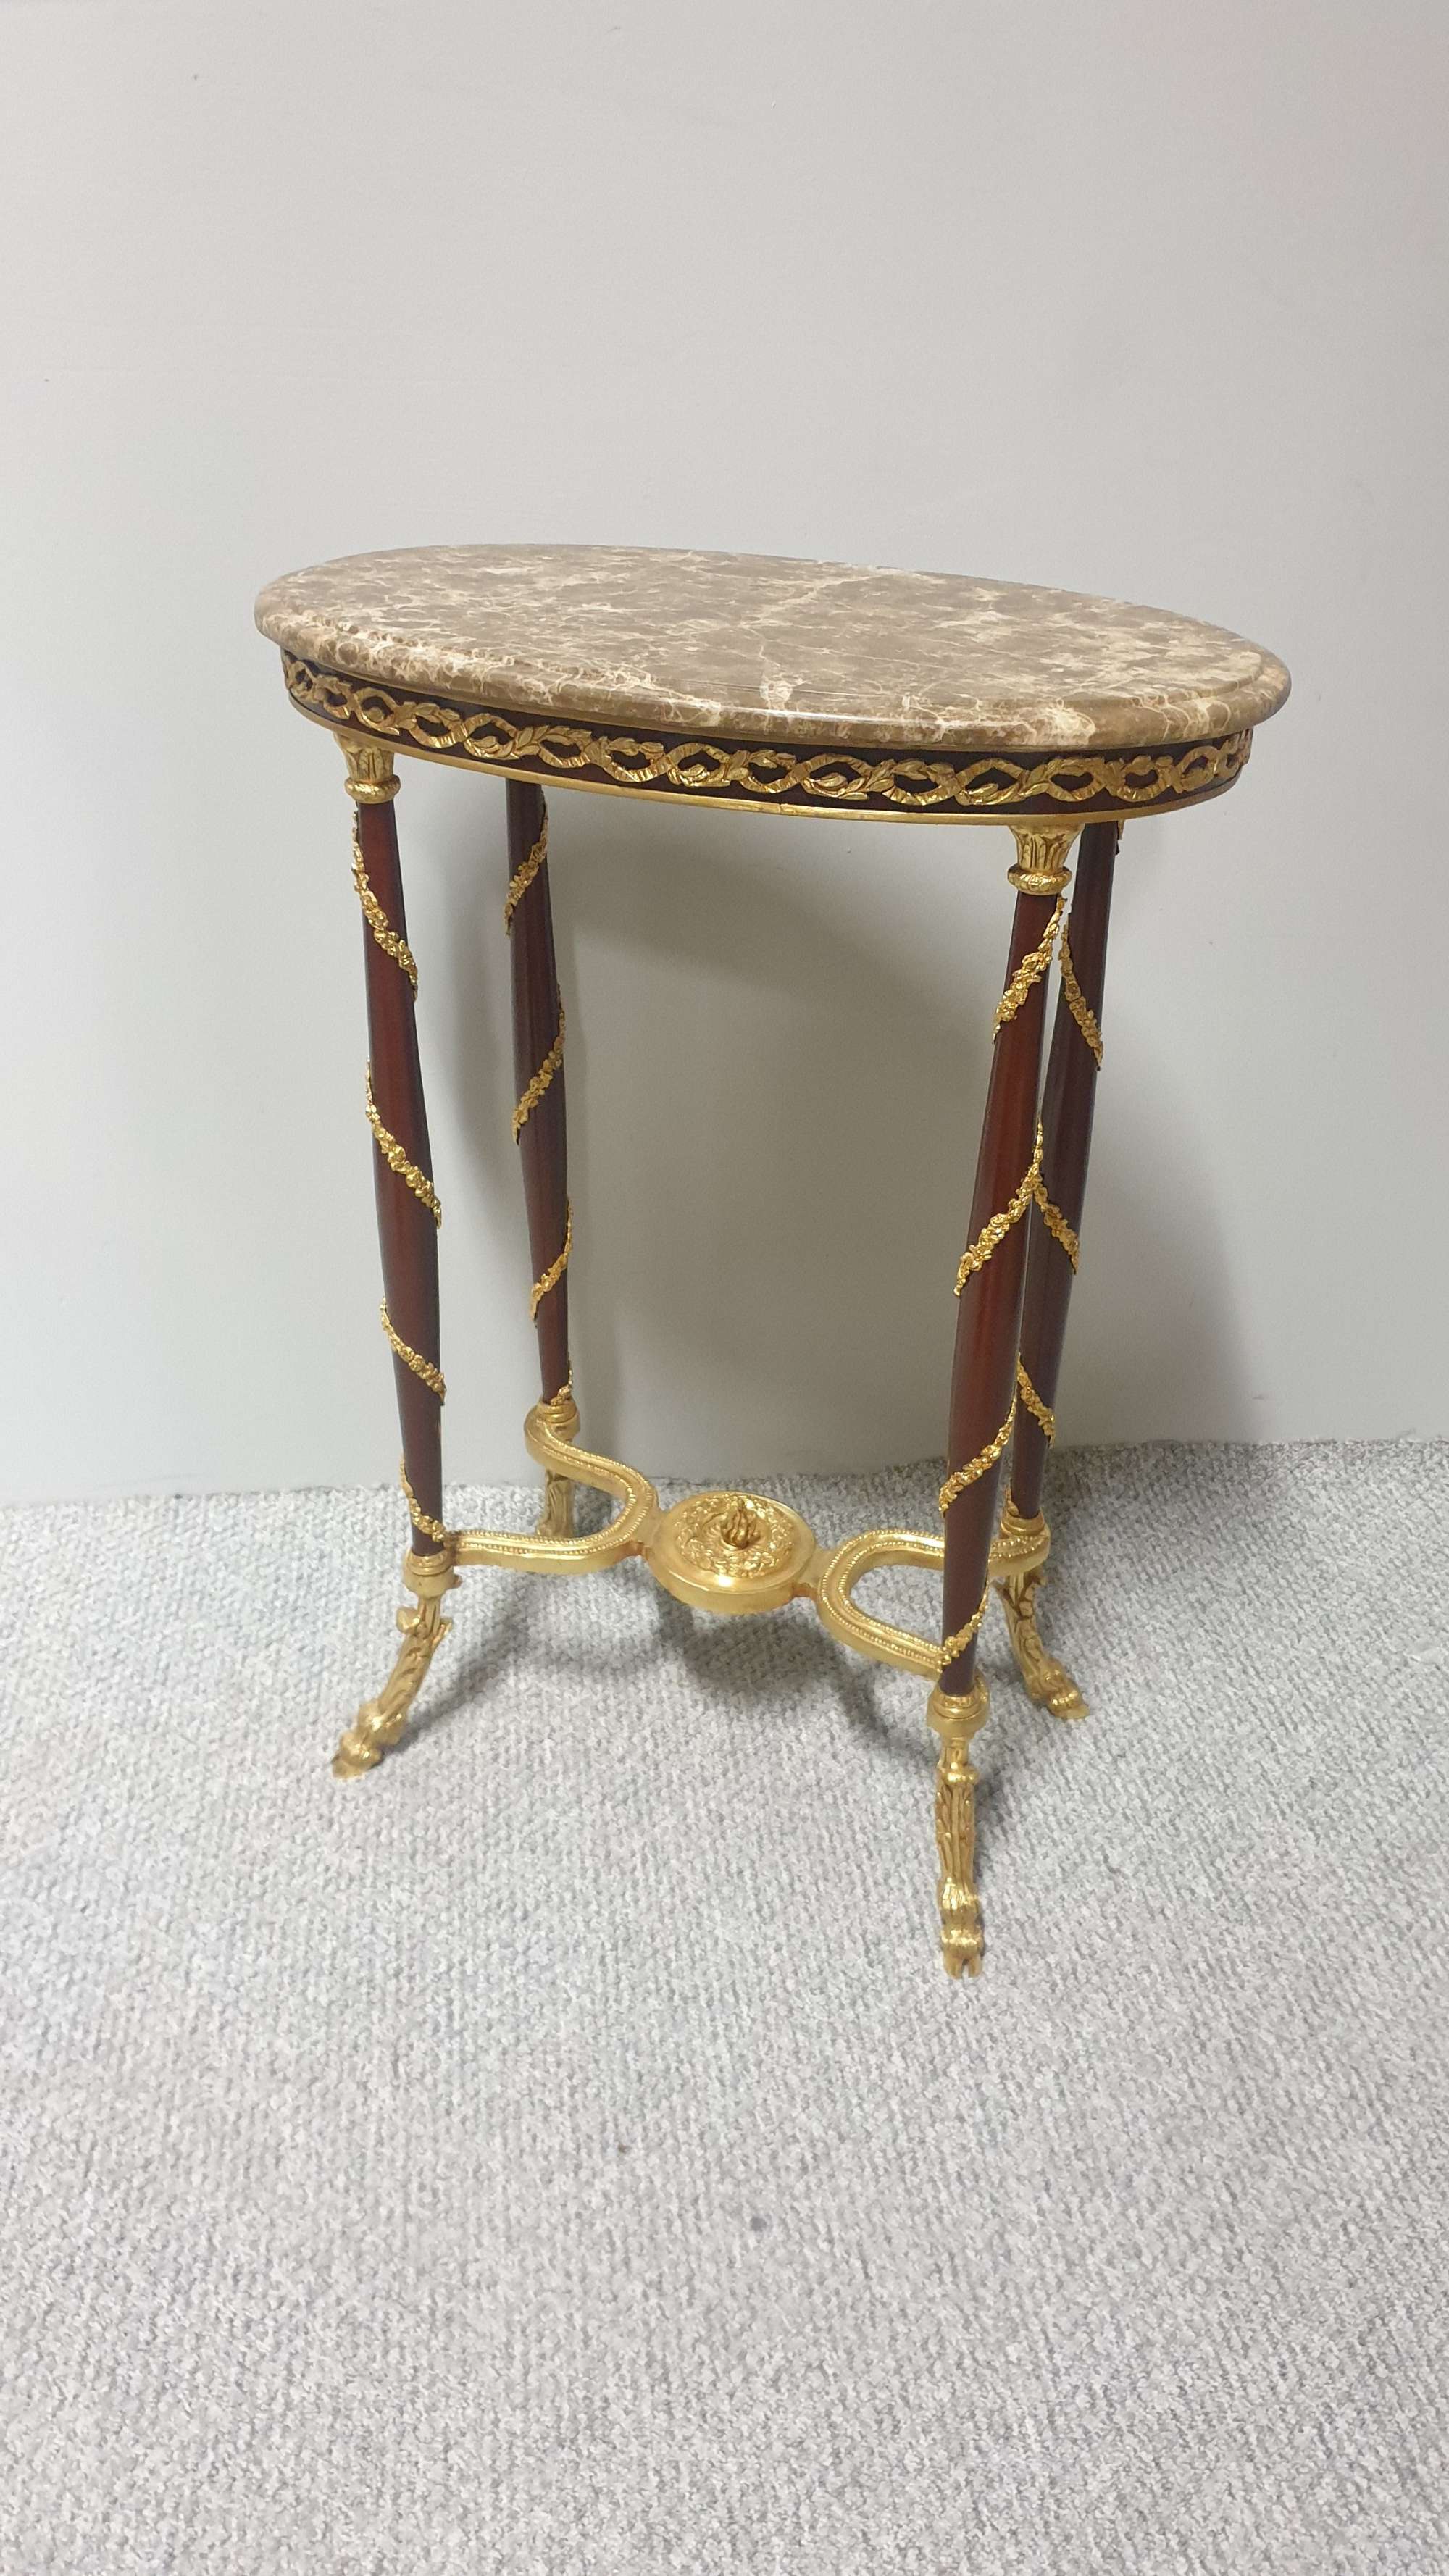 Superb Ormolu Mounted Occasional Lamp Table